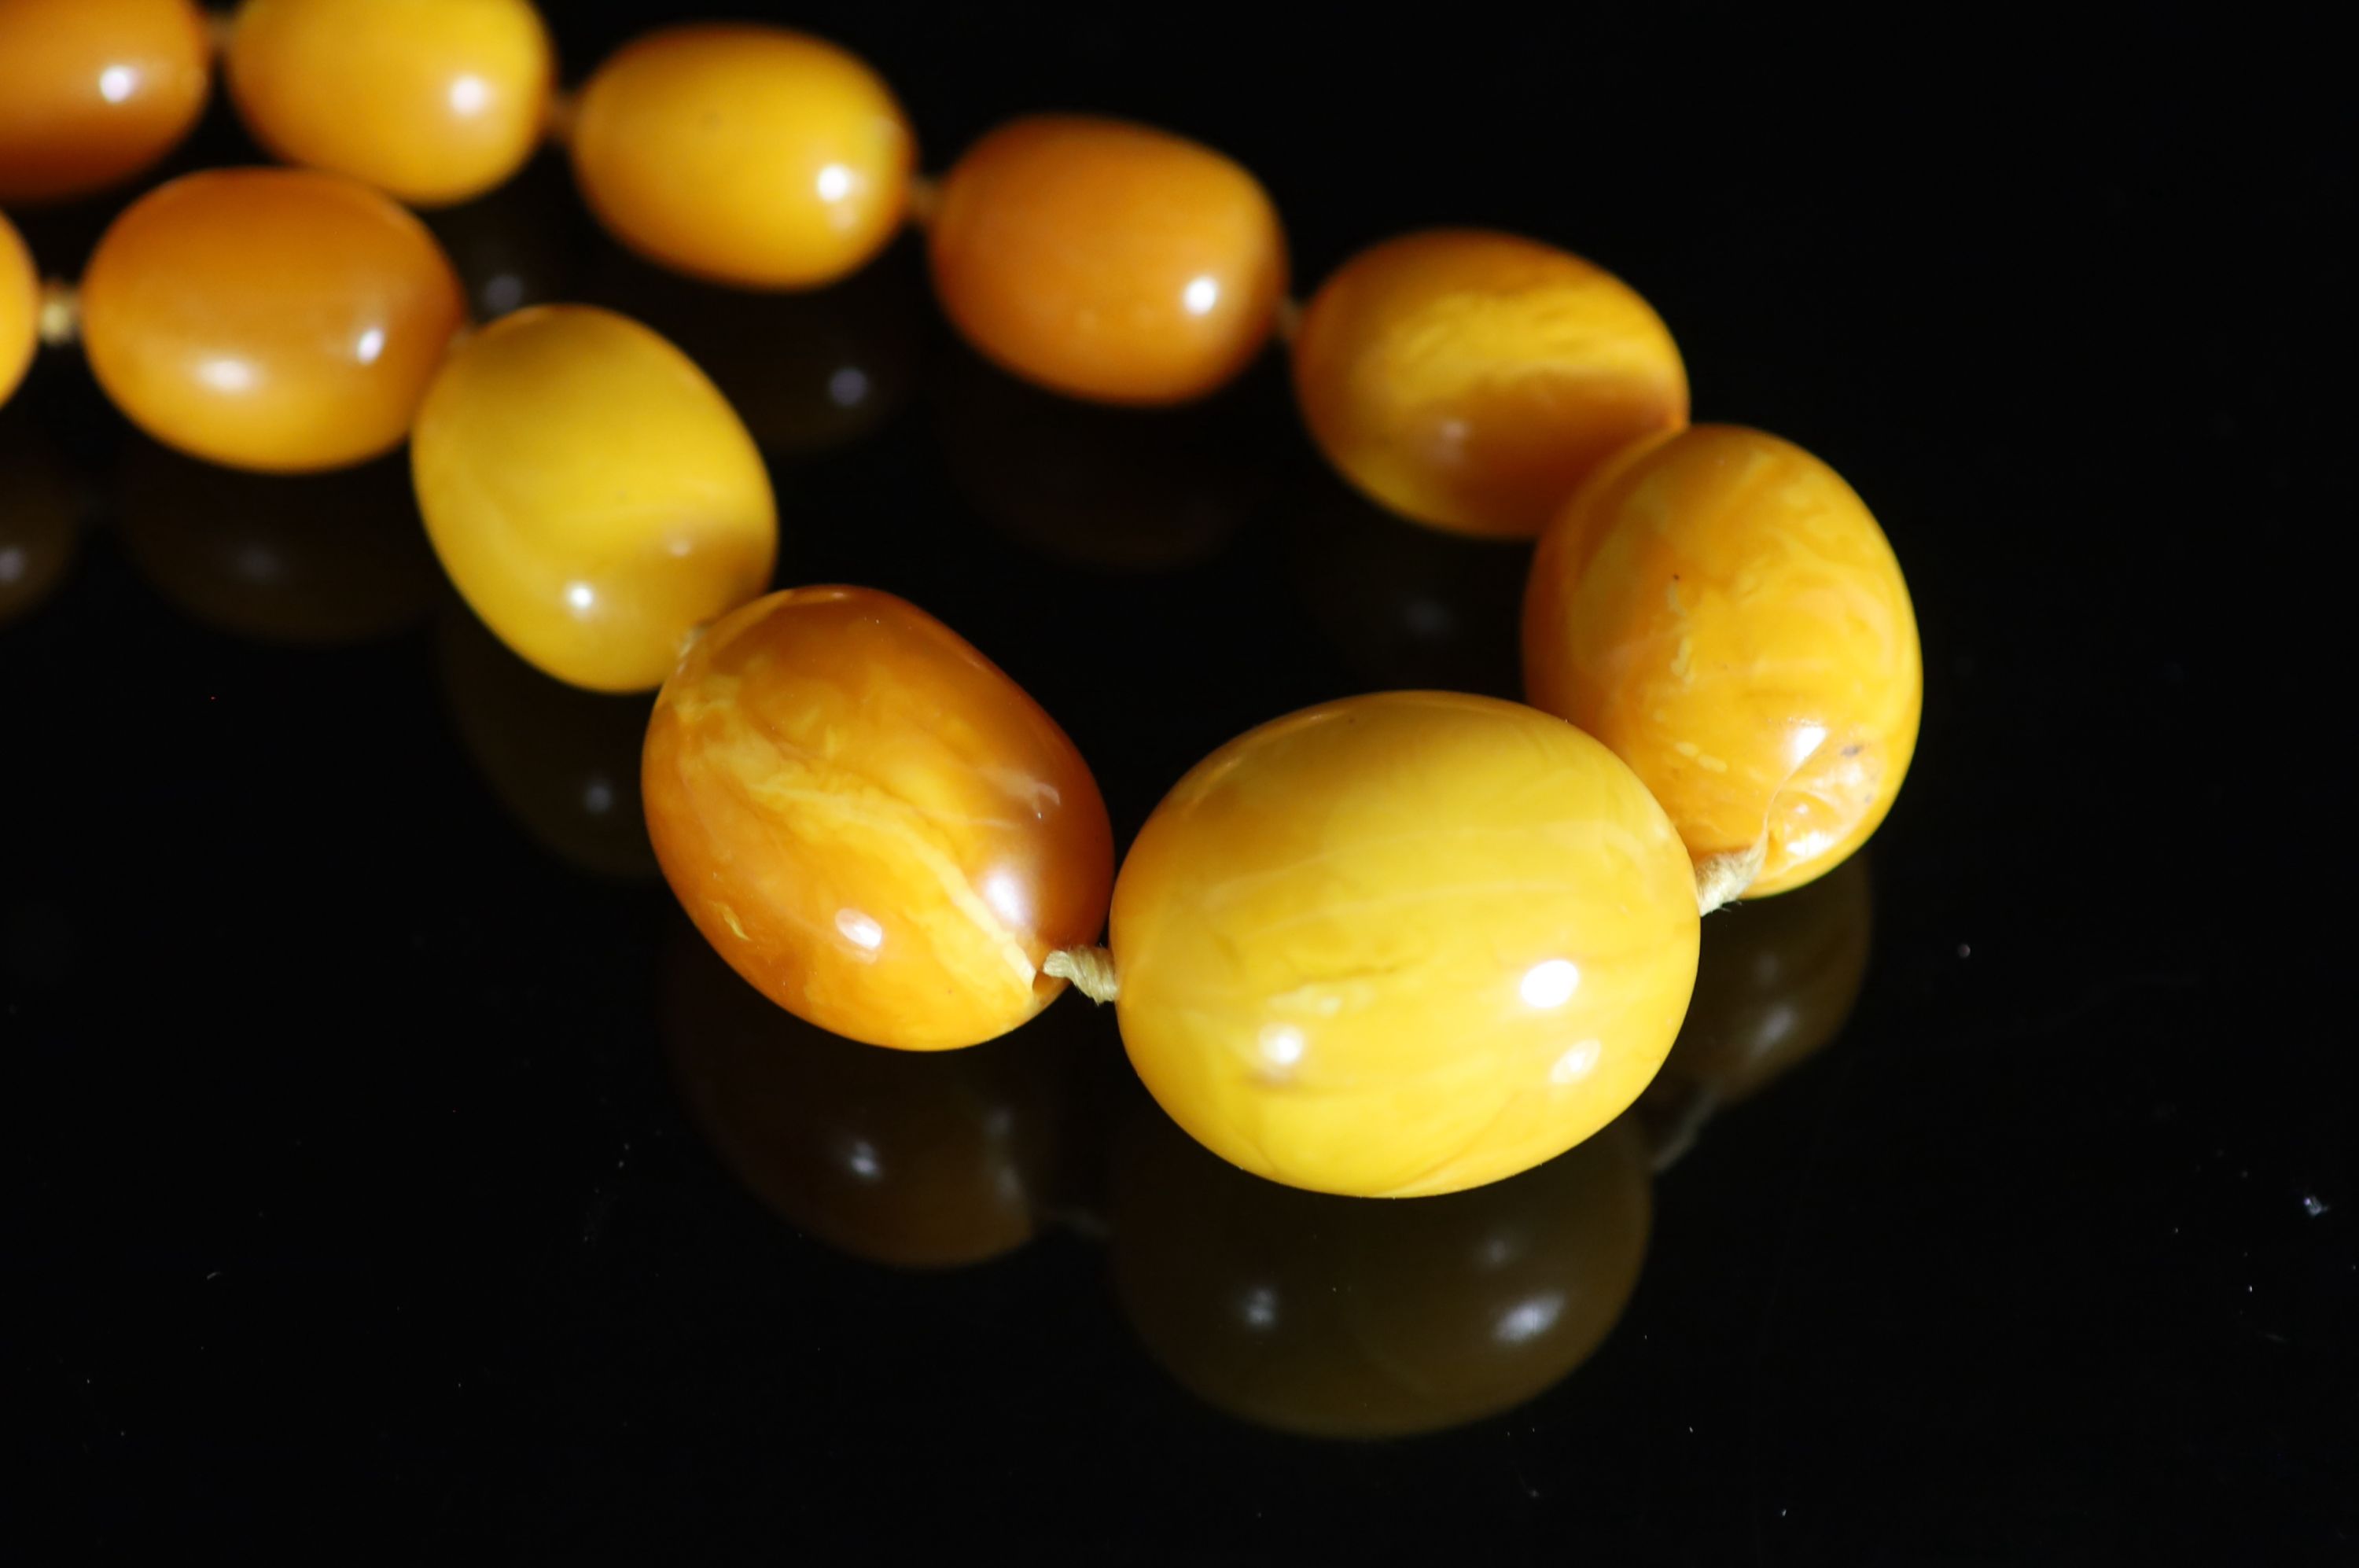 A single strand graduated oval amber bead necklace